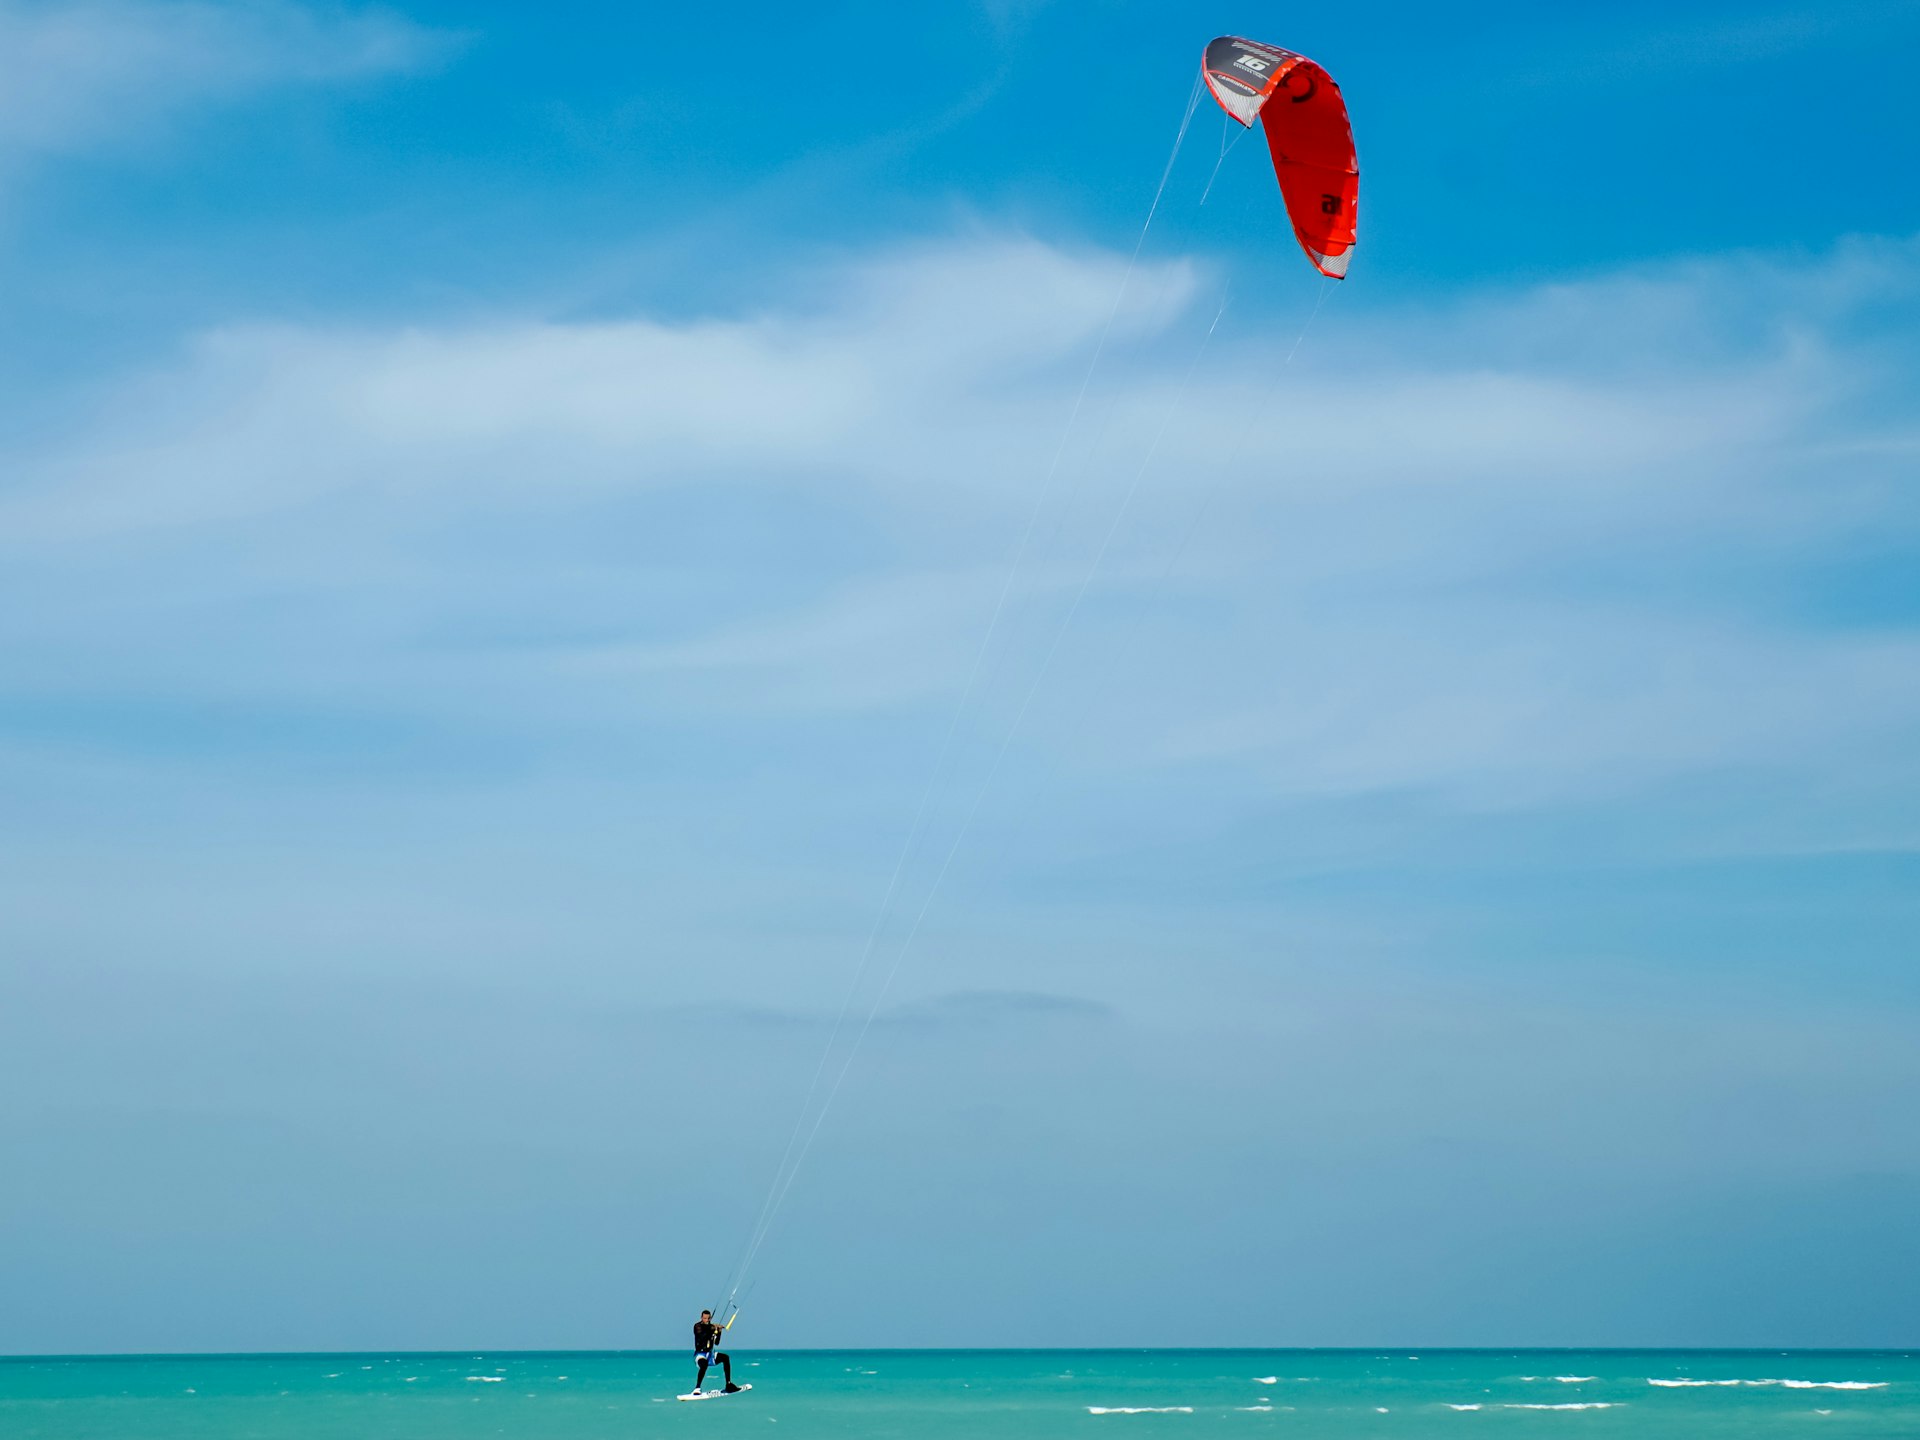 A kitesurfer under a red sail is carried along by the wind on the turquoise waters of Fuwairit Beach, Qatar 